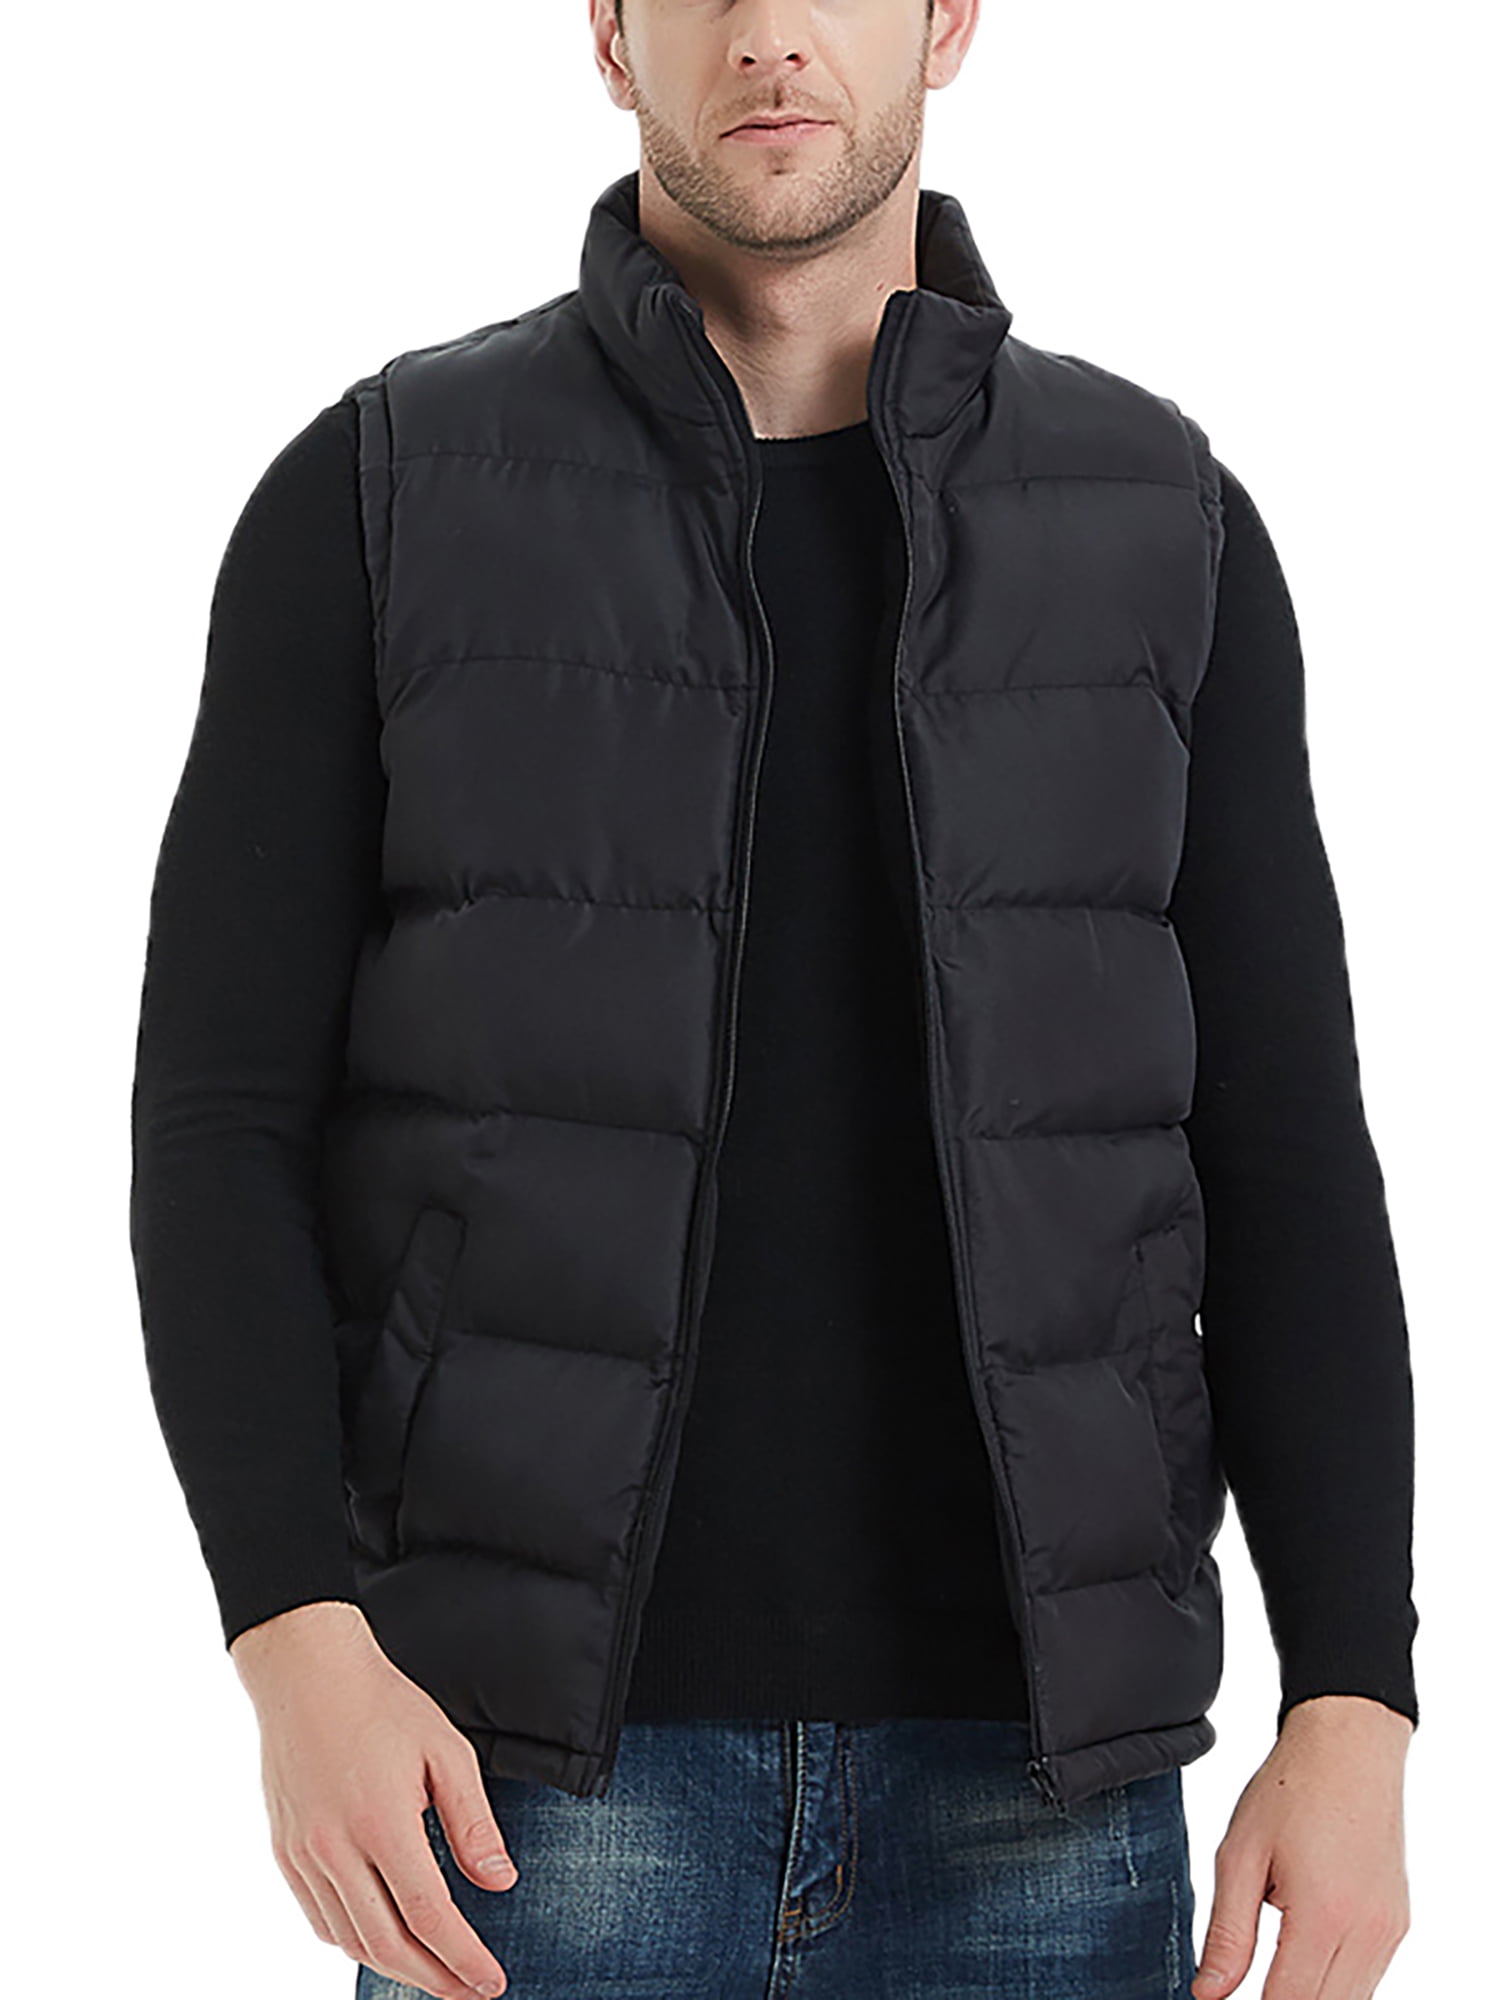 Flygo Mens Puffer Vest Winter Padded Vests Lightweight Stand Collar  Sleeveless Jacket Outerwear(Black-XS) at  Men's Clothing store